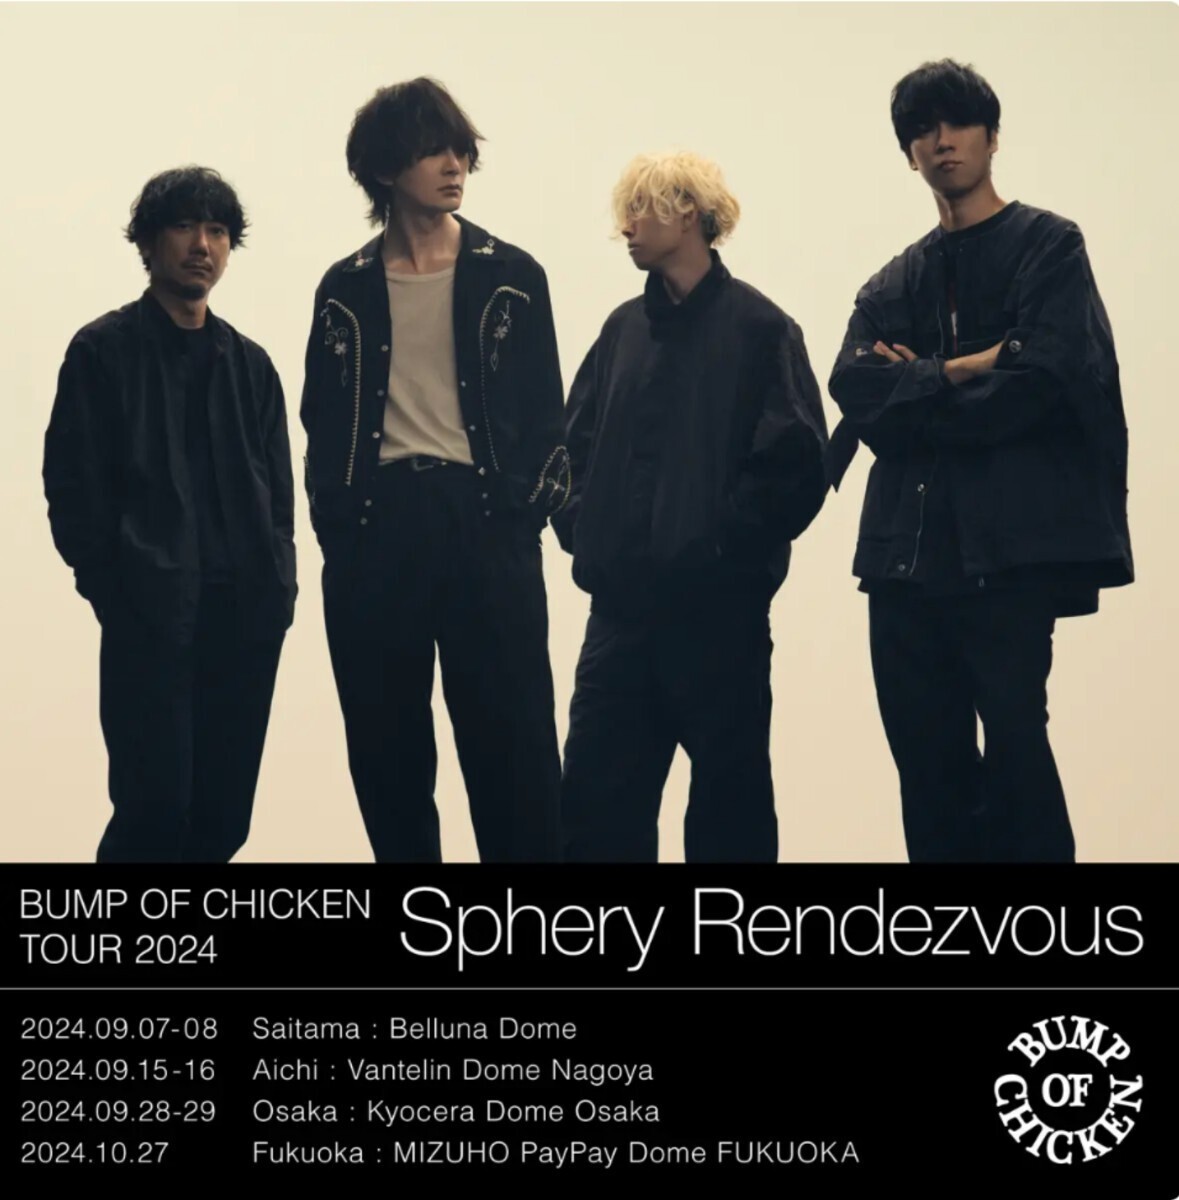 BUMP OF CHICKEN TOUR 2024 Sphery Rendezvous 最速先行抽選 申し込み シリアルコード の画像1